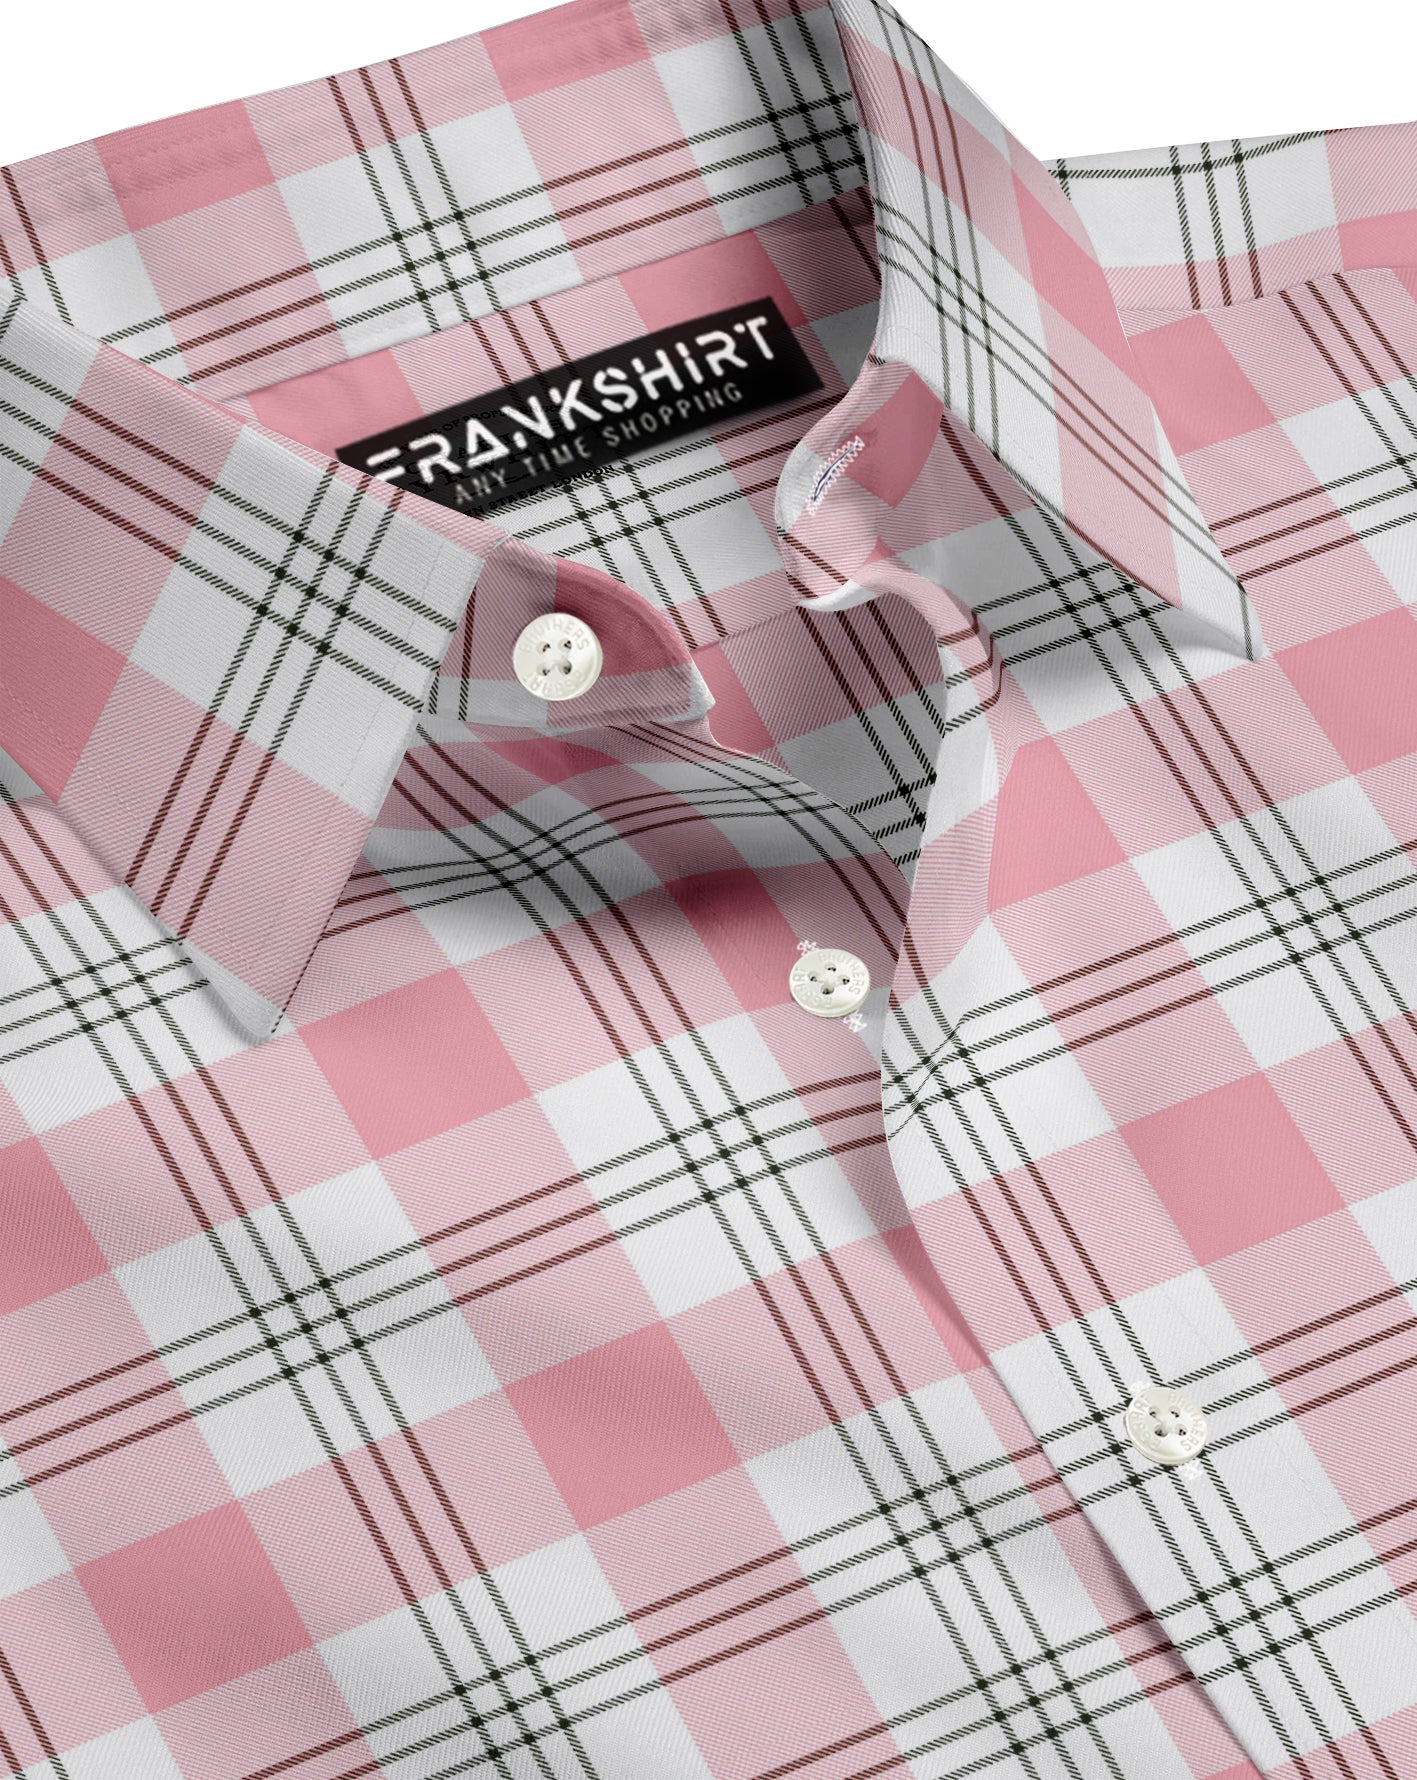 Pack of 2 Cotton Check Shirt for Man (White Pink and Lining Colour)